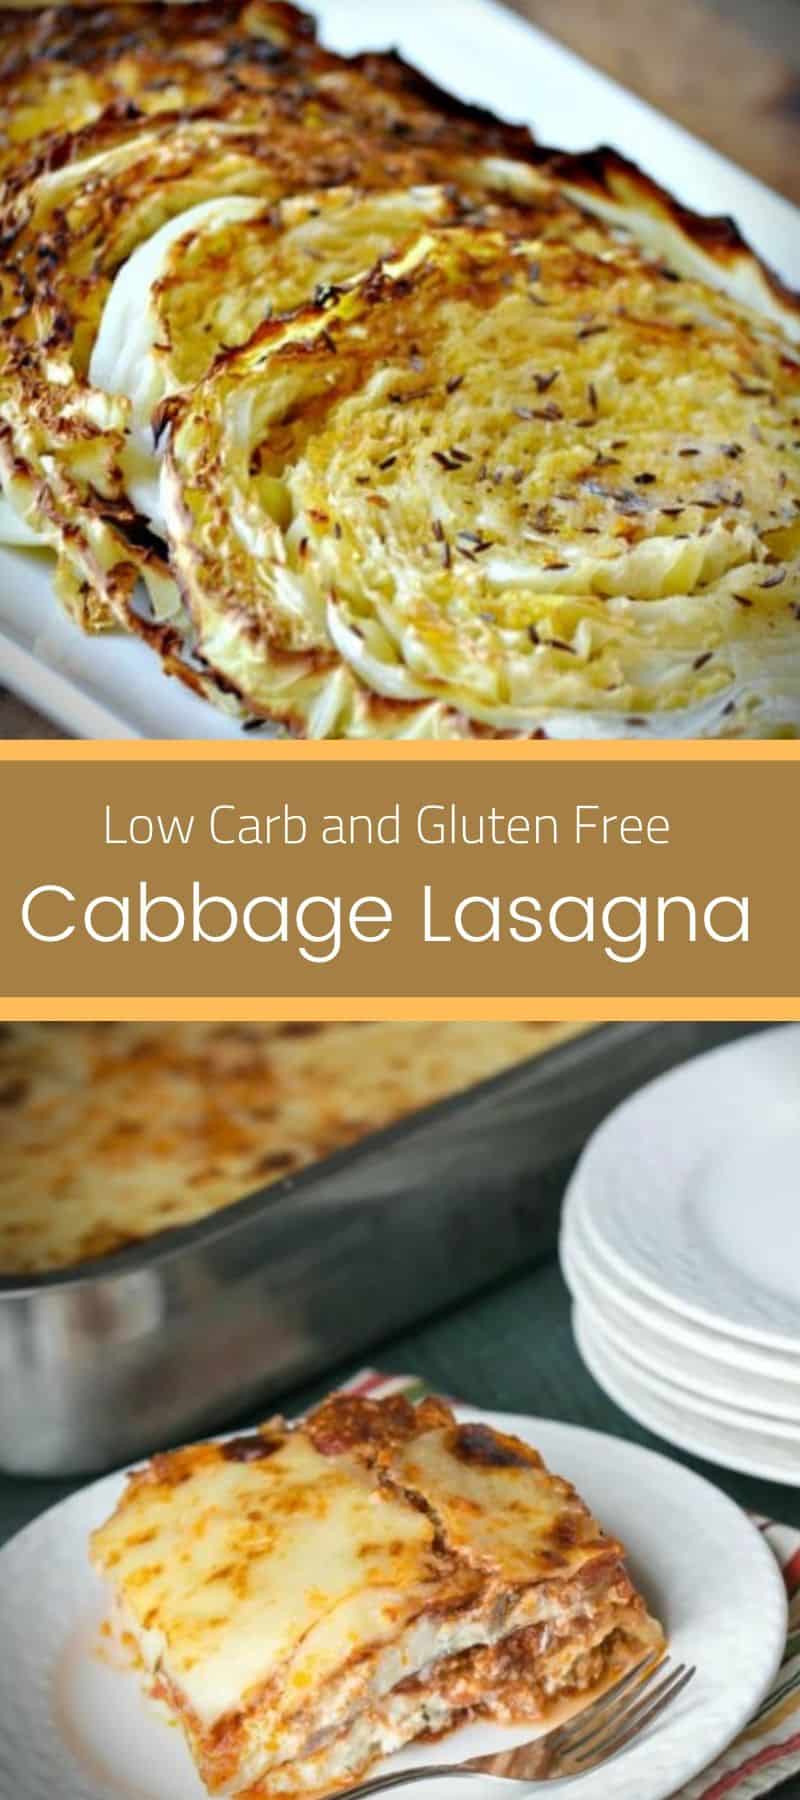 Cabbage Lasagna Low Carb and Gluten Free 3